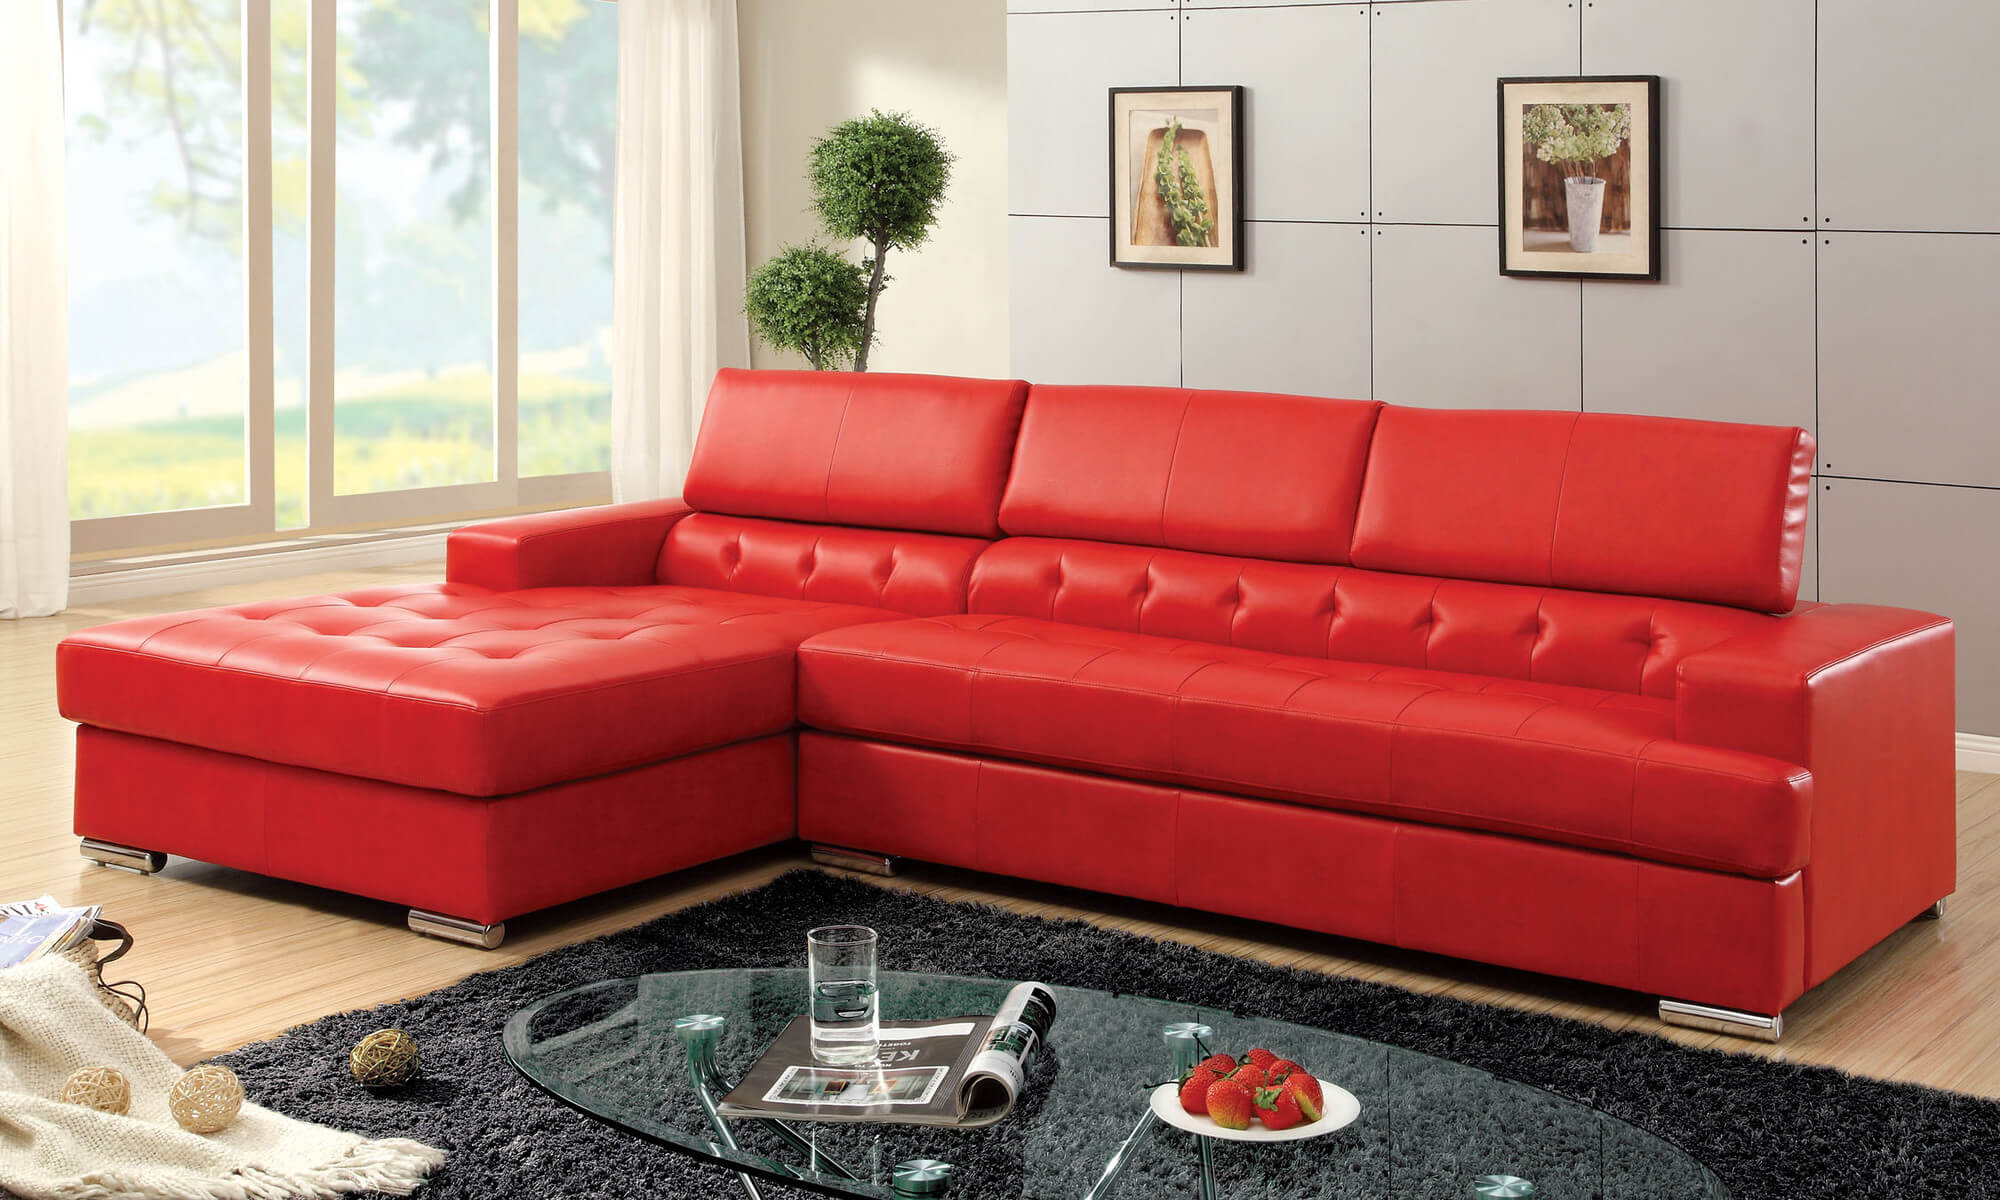 Popular Hokku Designs Red Leather Sectional with Partially Tufted Upholstery red sectional sofa